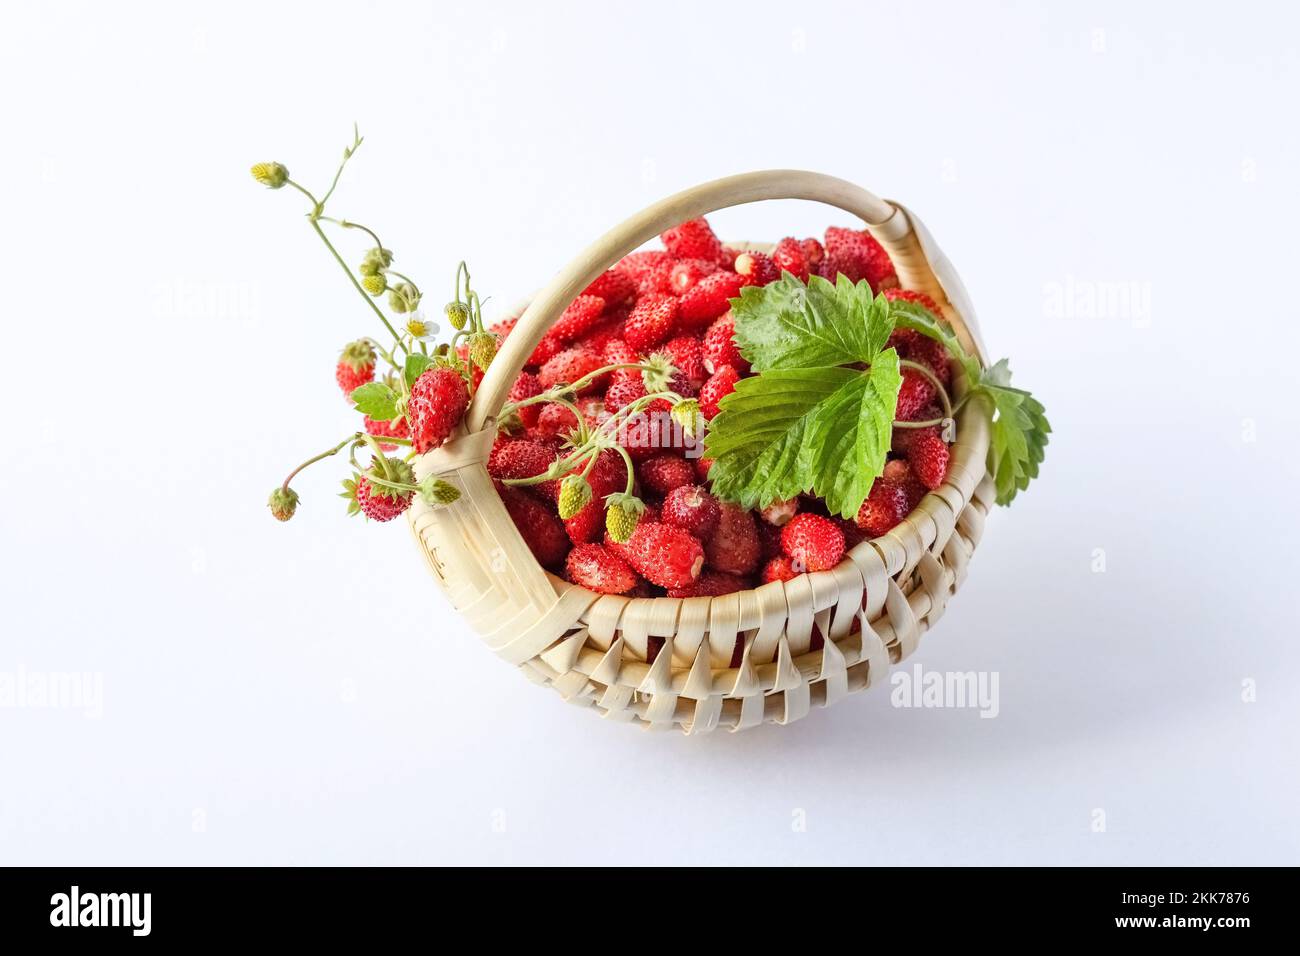 Wild strawberries in a beige basket on a blue background with green leaves, healthy and delicious food Stock Photo